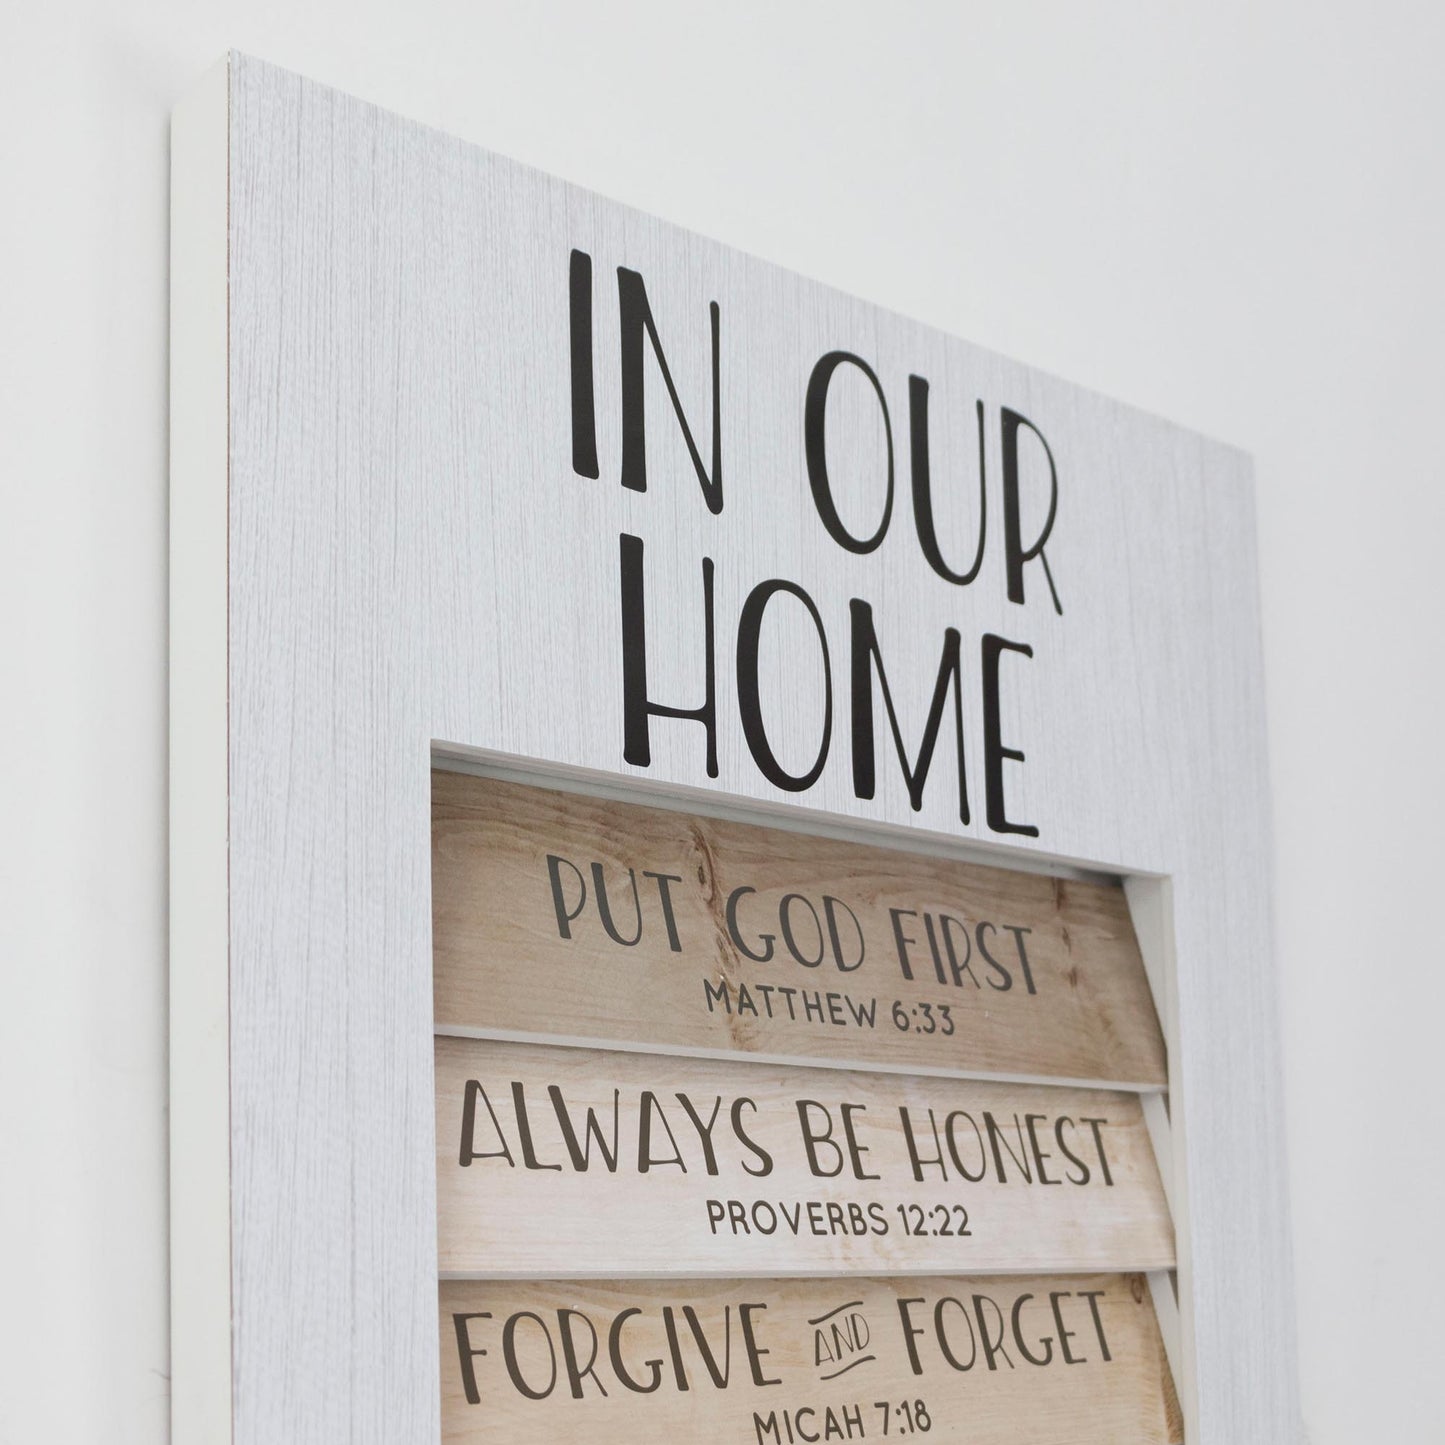 In Our Home Inspirational Shutter Window Plaque